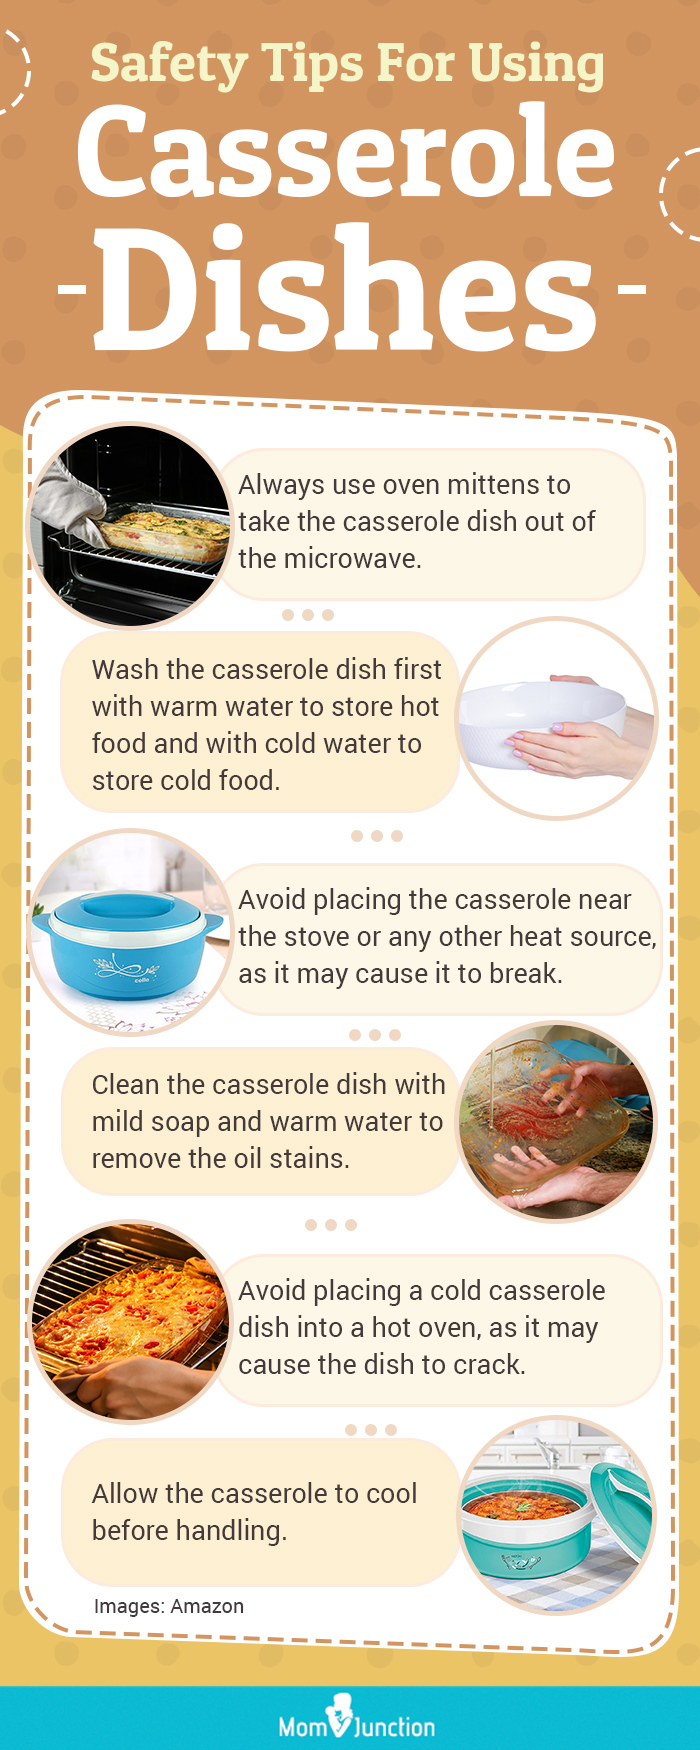 Safety Tips For Using Casserole Dishes(infographic)